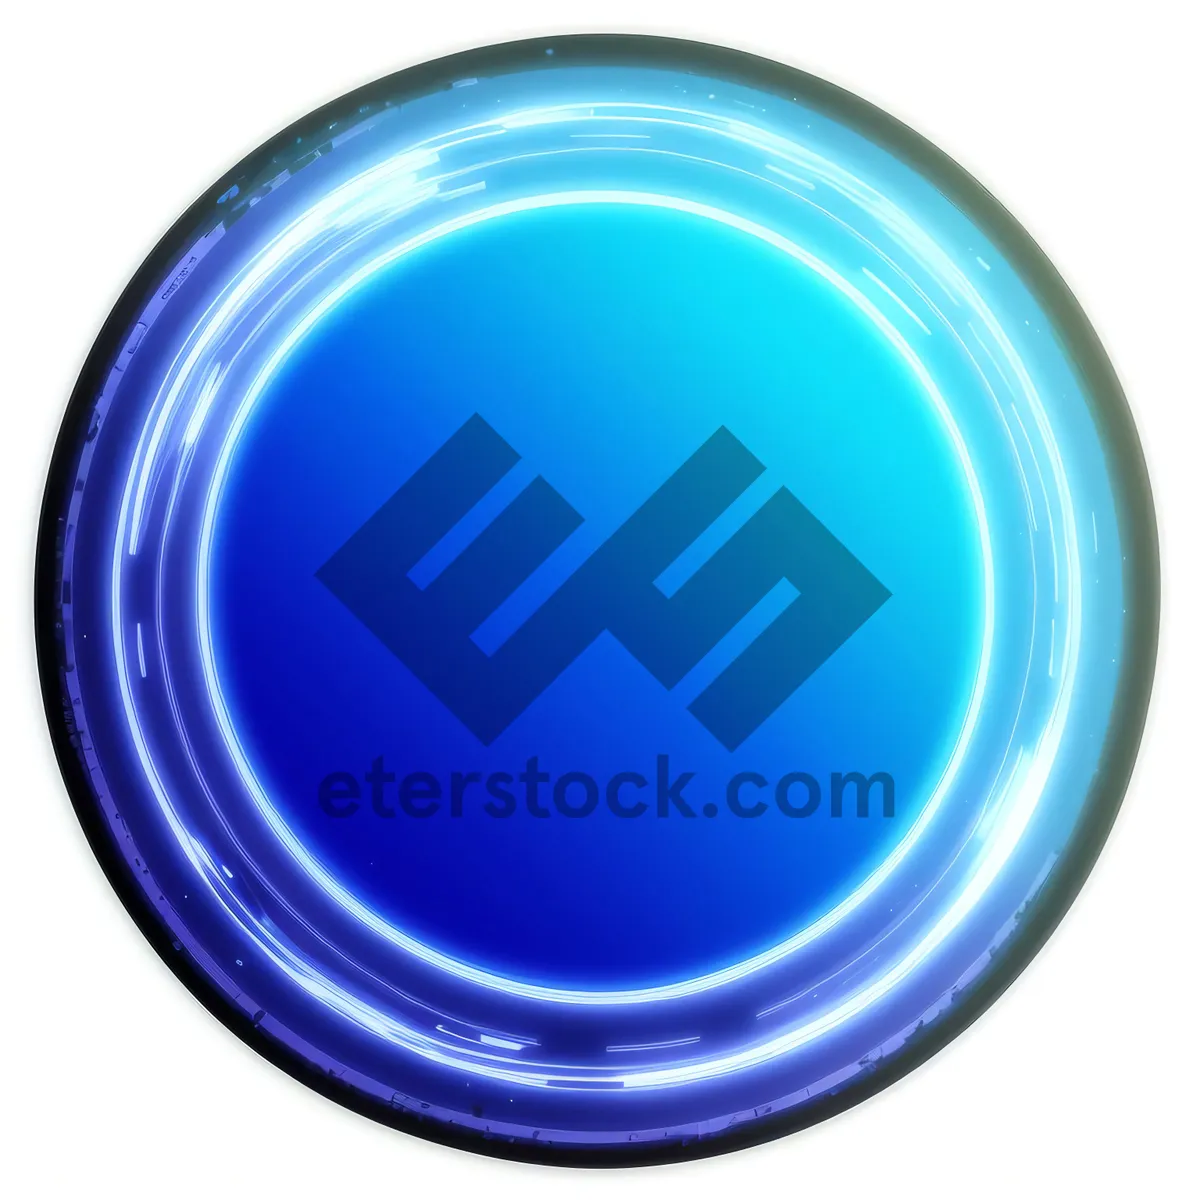 Picture of Glossy Round Glass Web Button Design